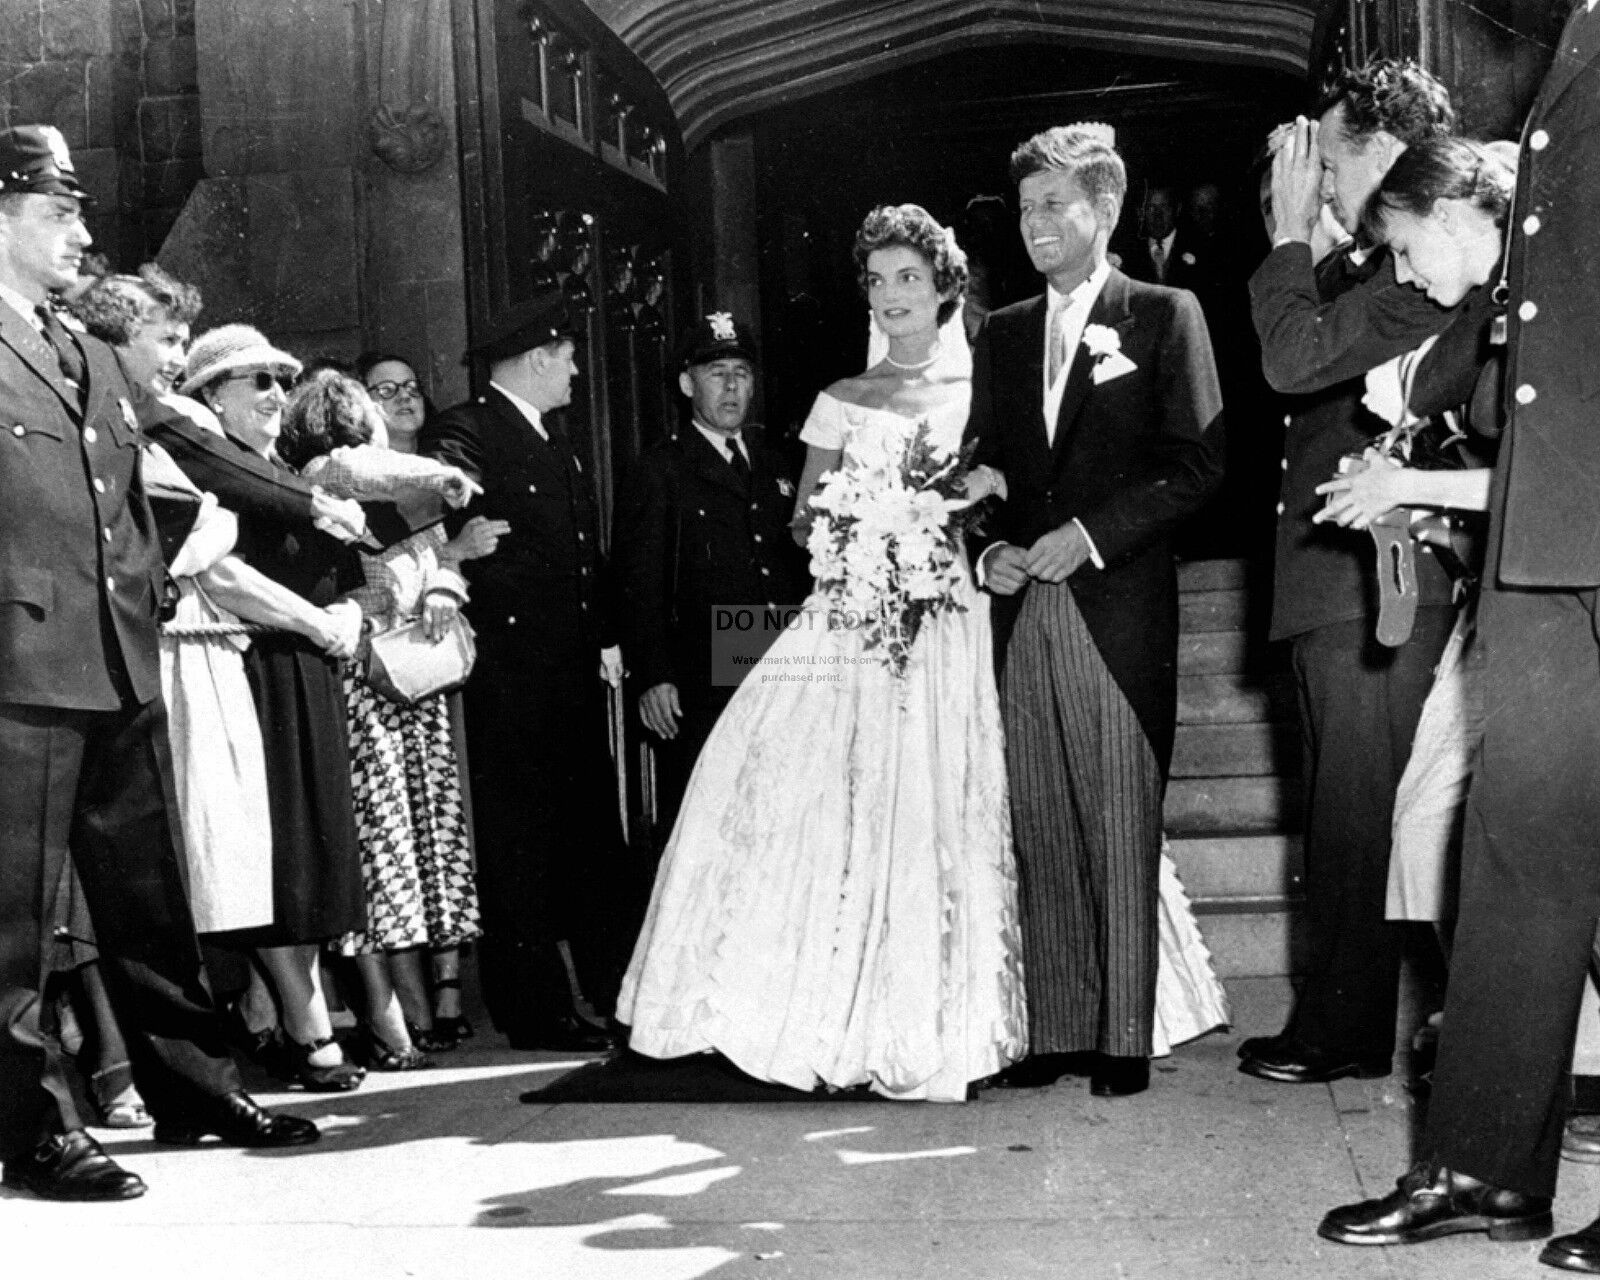 JOHN F. KENNEDY JACKIE LEAVE ST. MARY*S CHURCH AFTER WEDDING 8X10 PHOTO (AB-229)